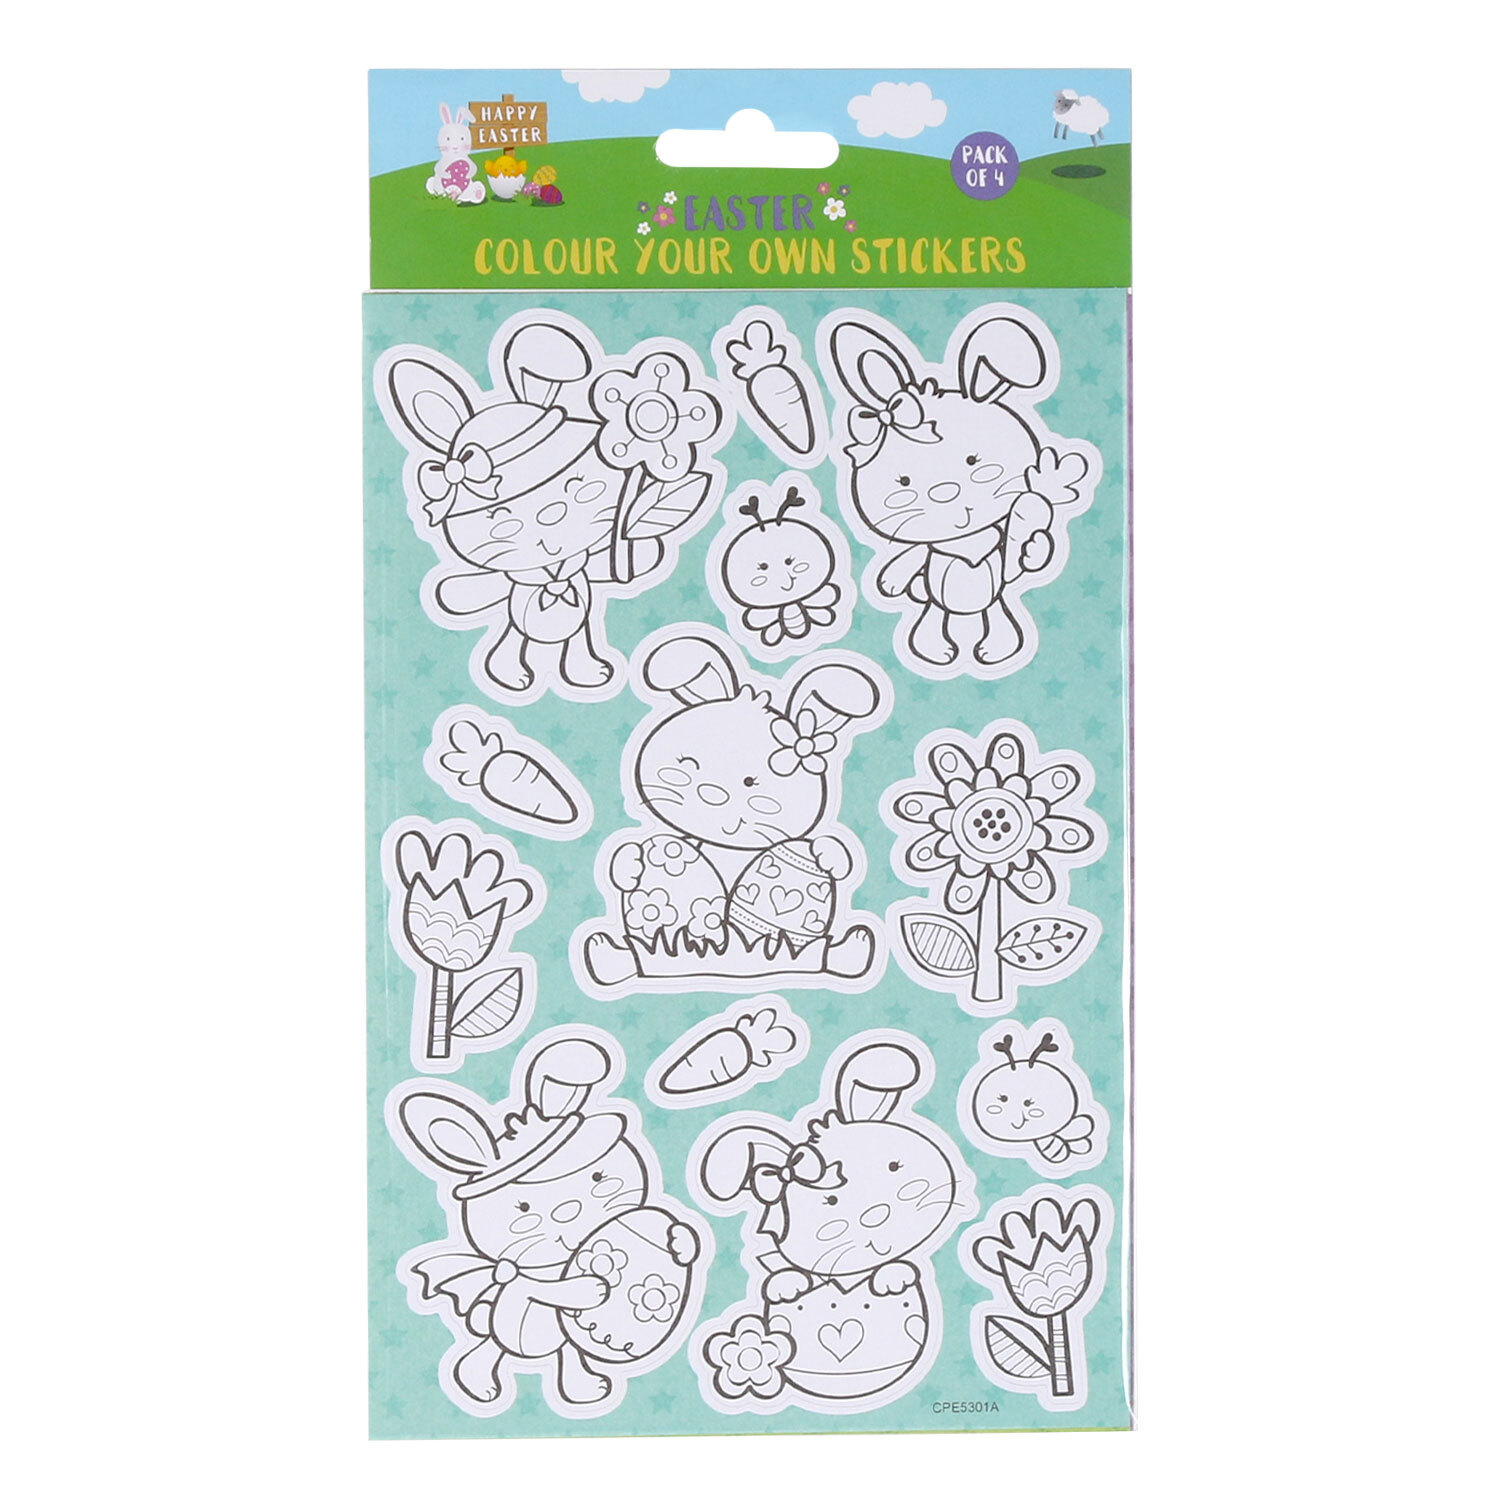 Colour Your Own Easter Stickers Image